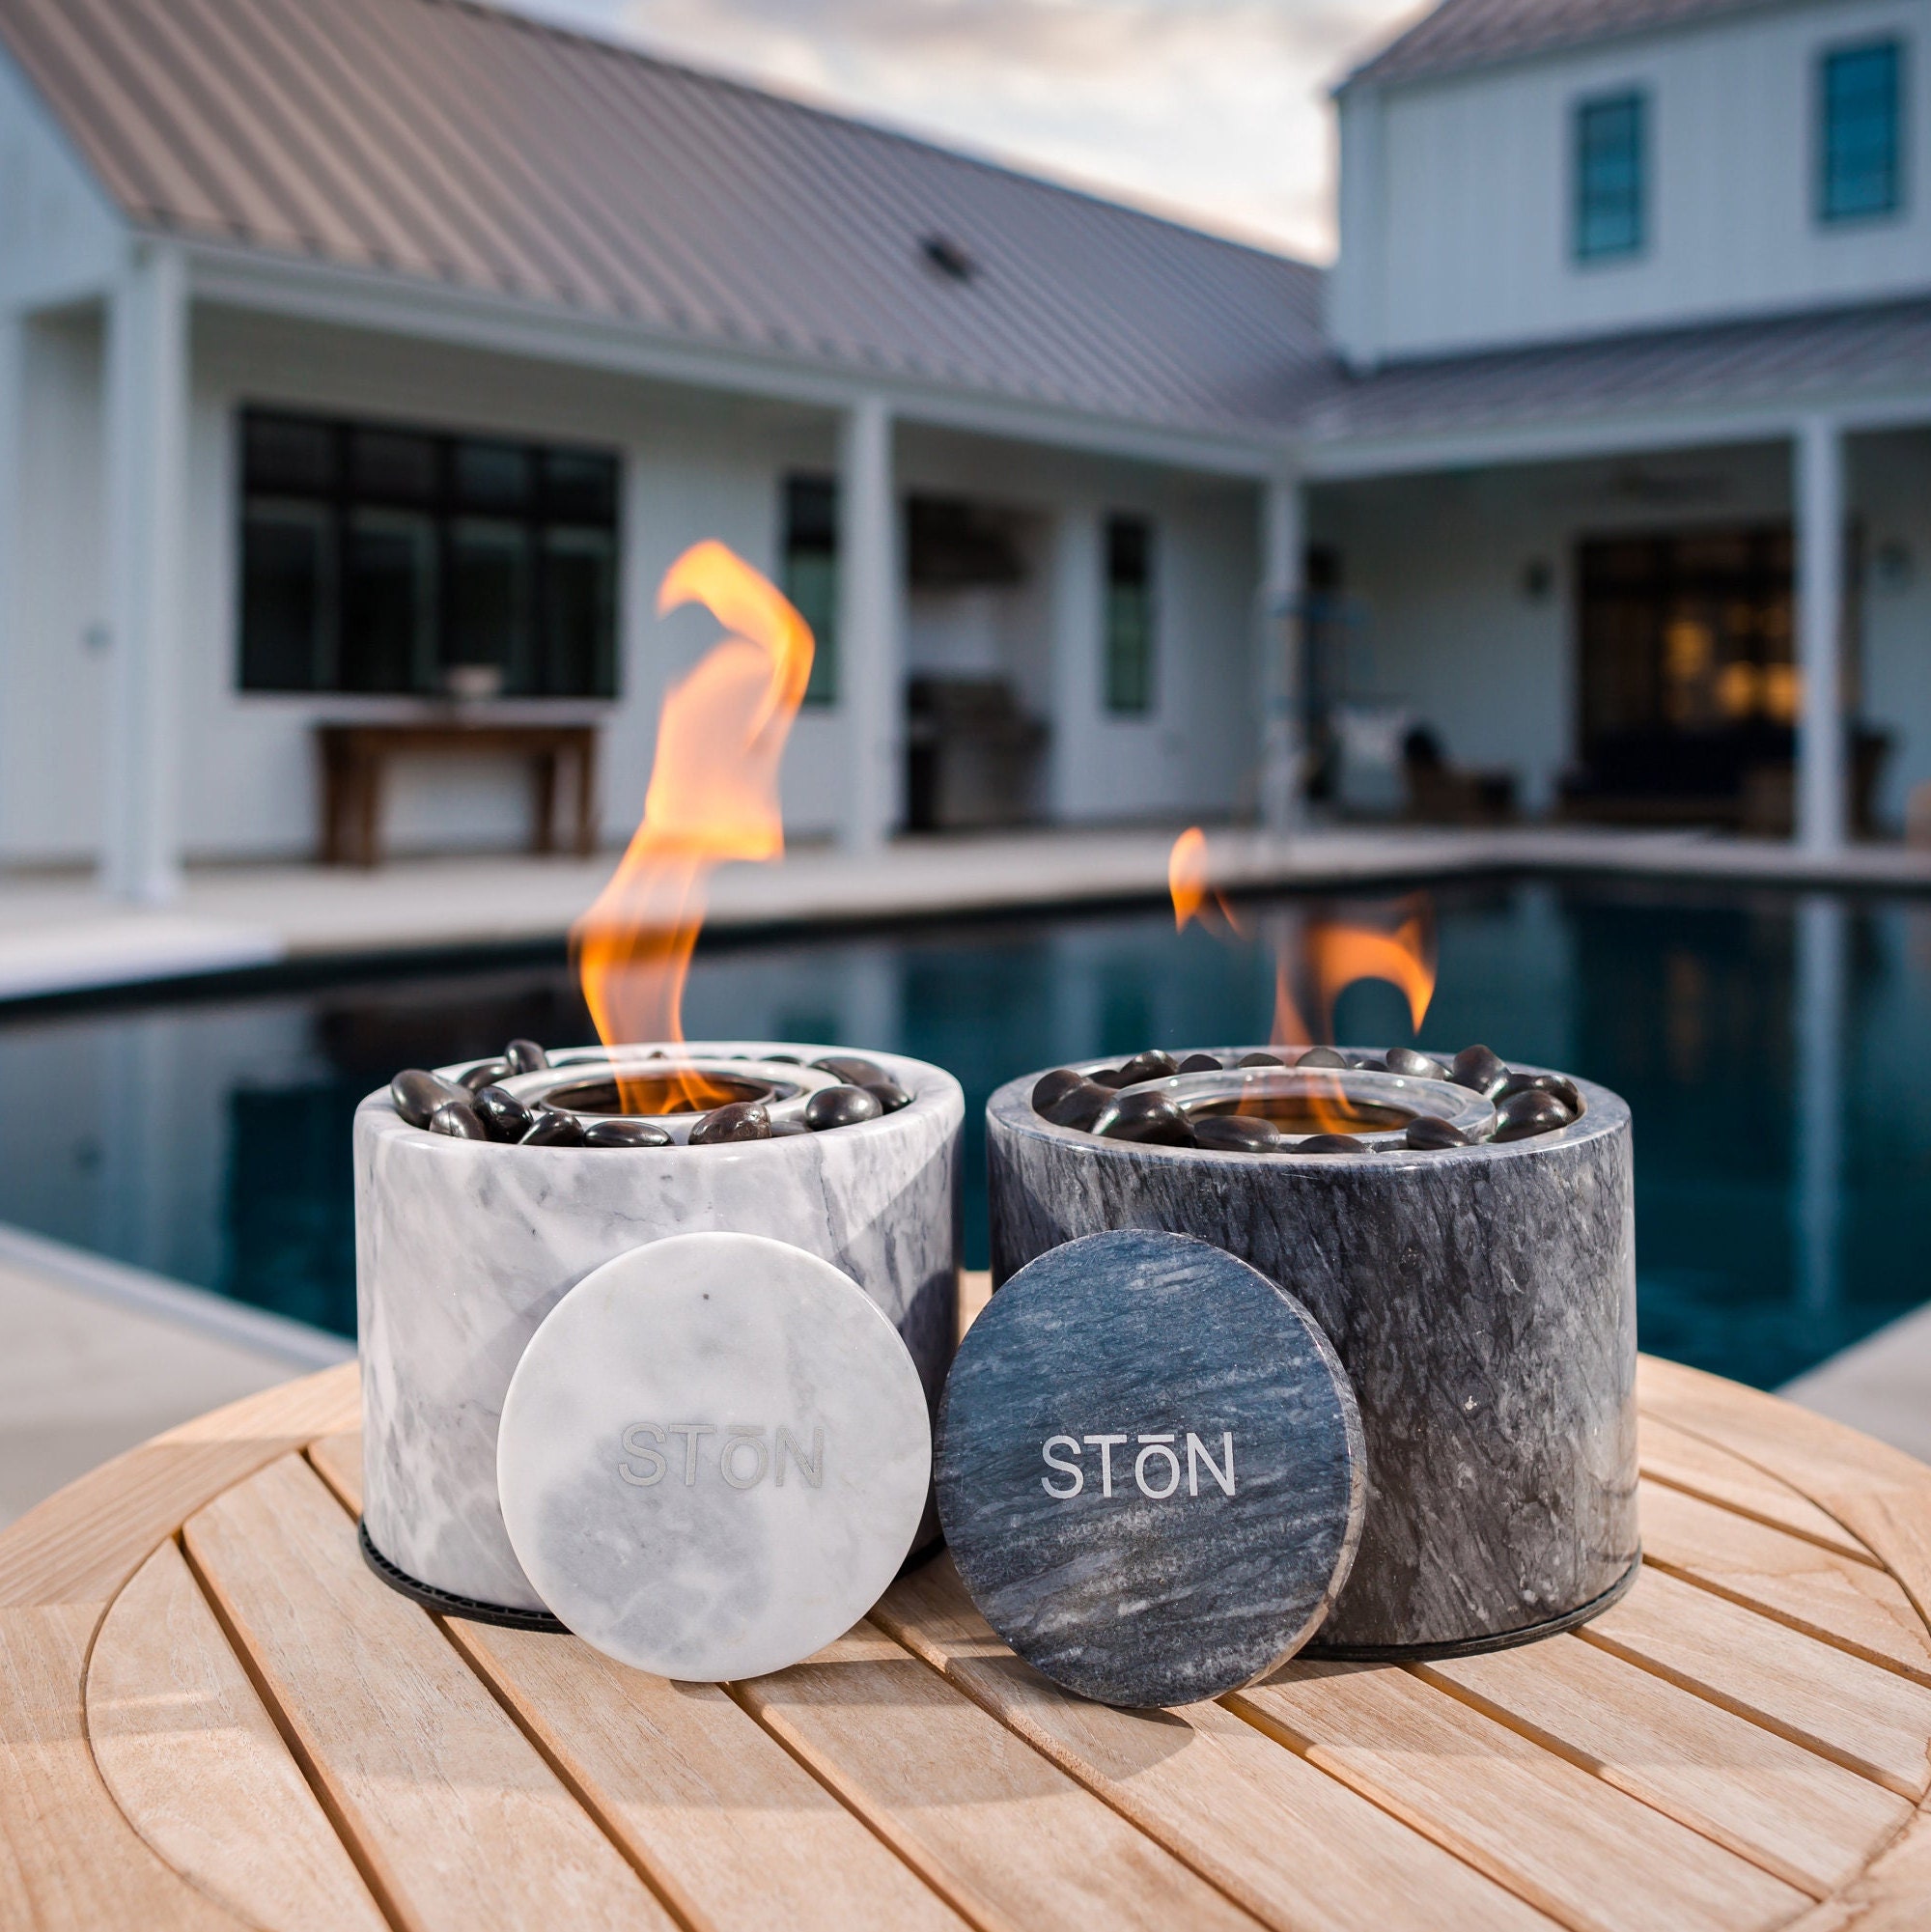 Stonhome Tabletop Fire Pit Bowl - The Original Marble Portable Fireplace,  Indoor Outdoor, Mini Fire Pit Clean Burning Real Flame for Patio Balcony